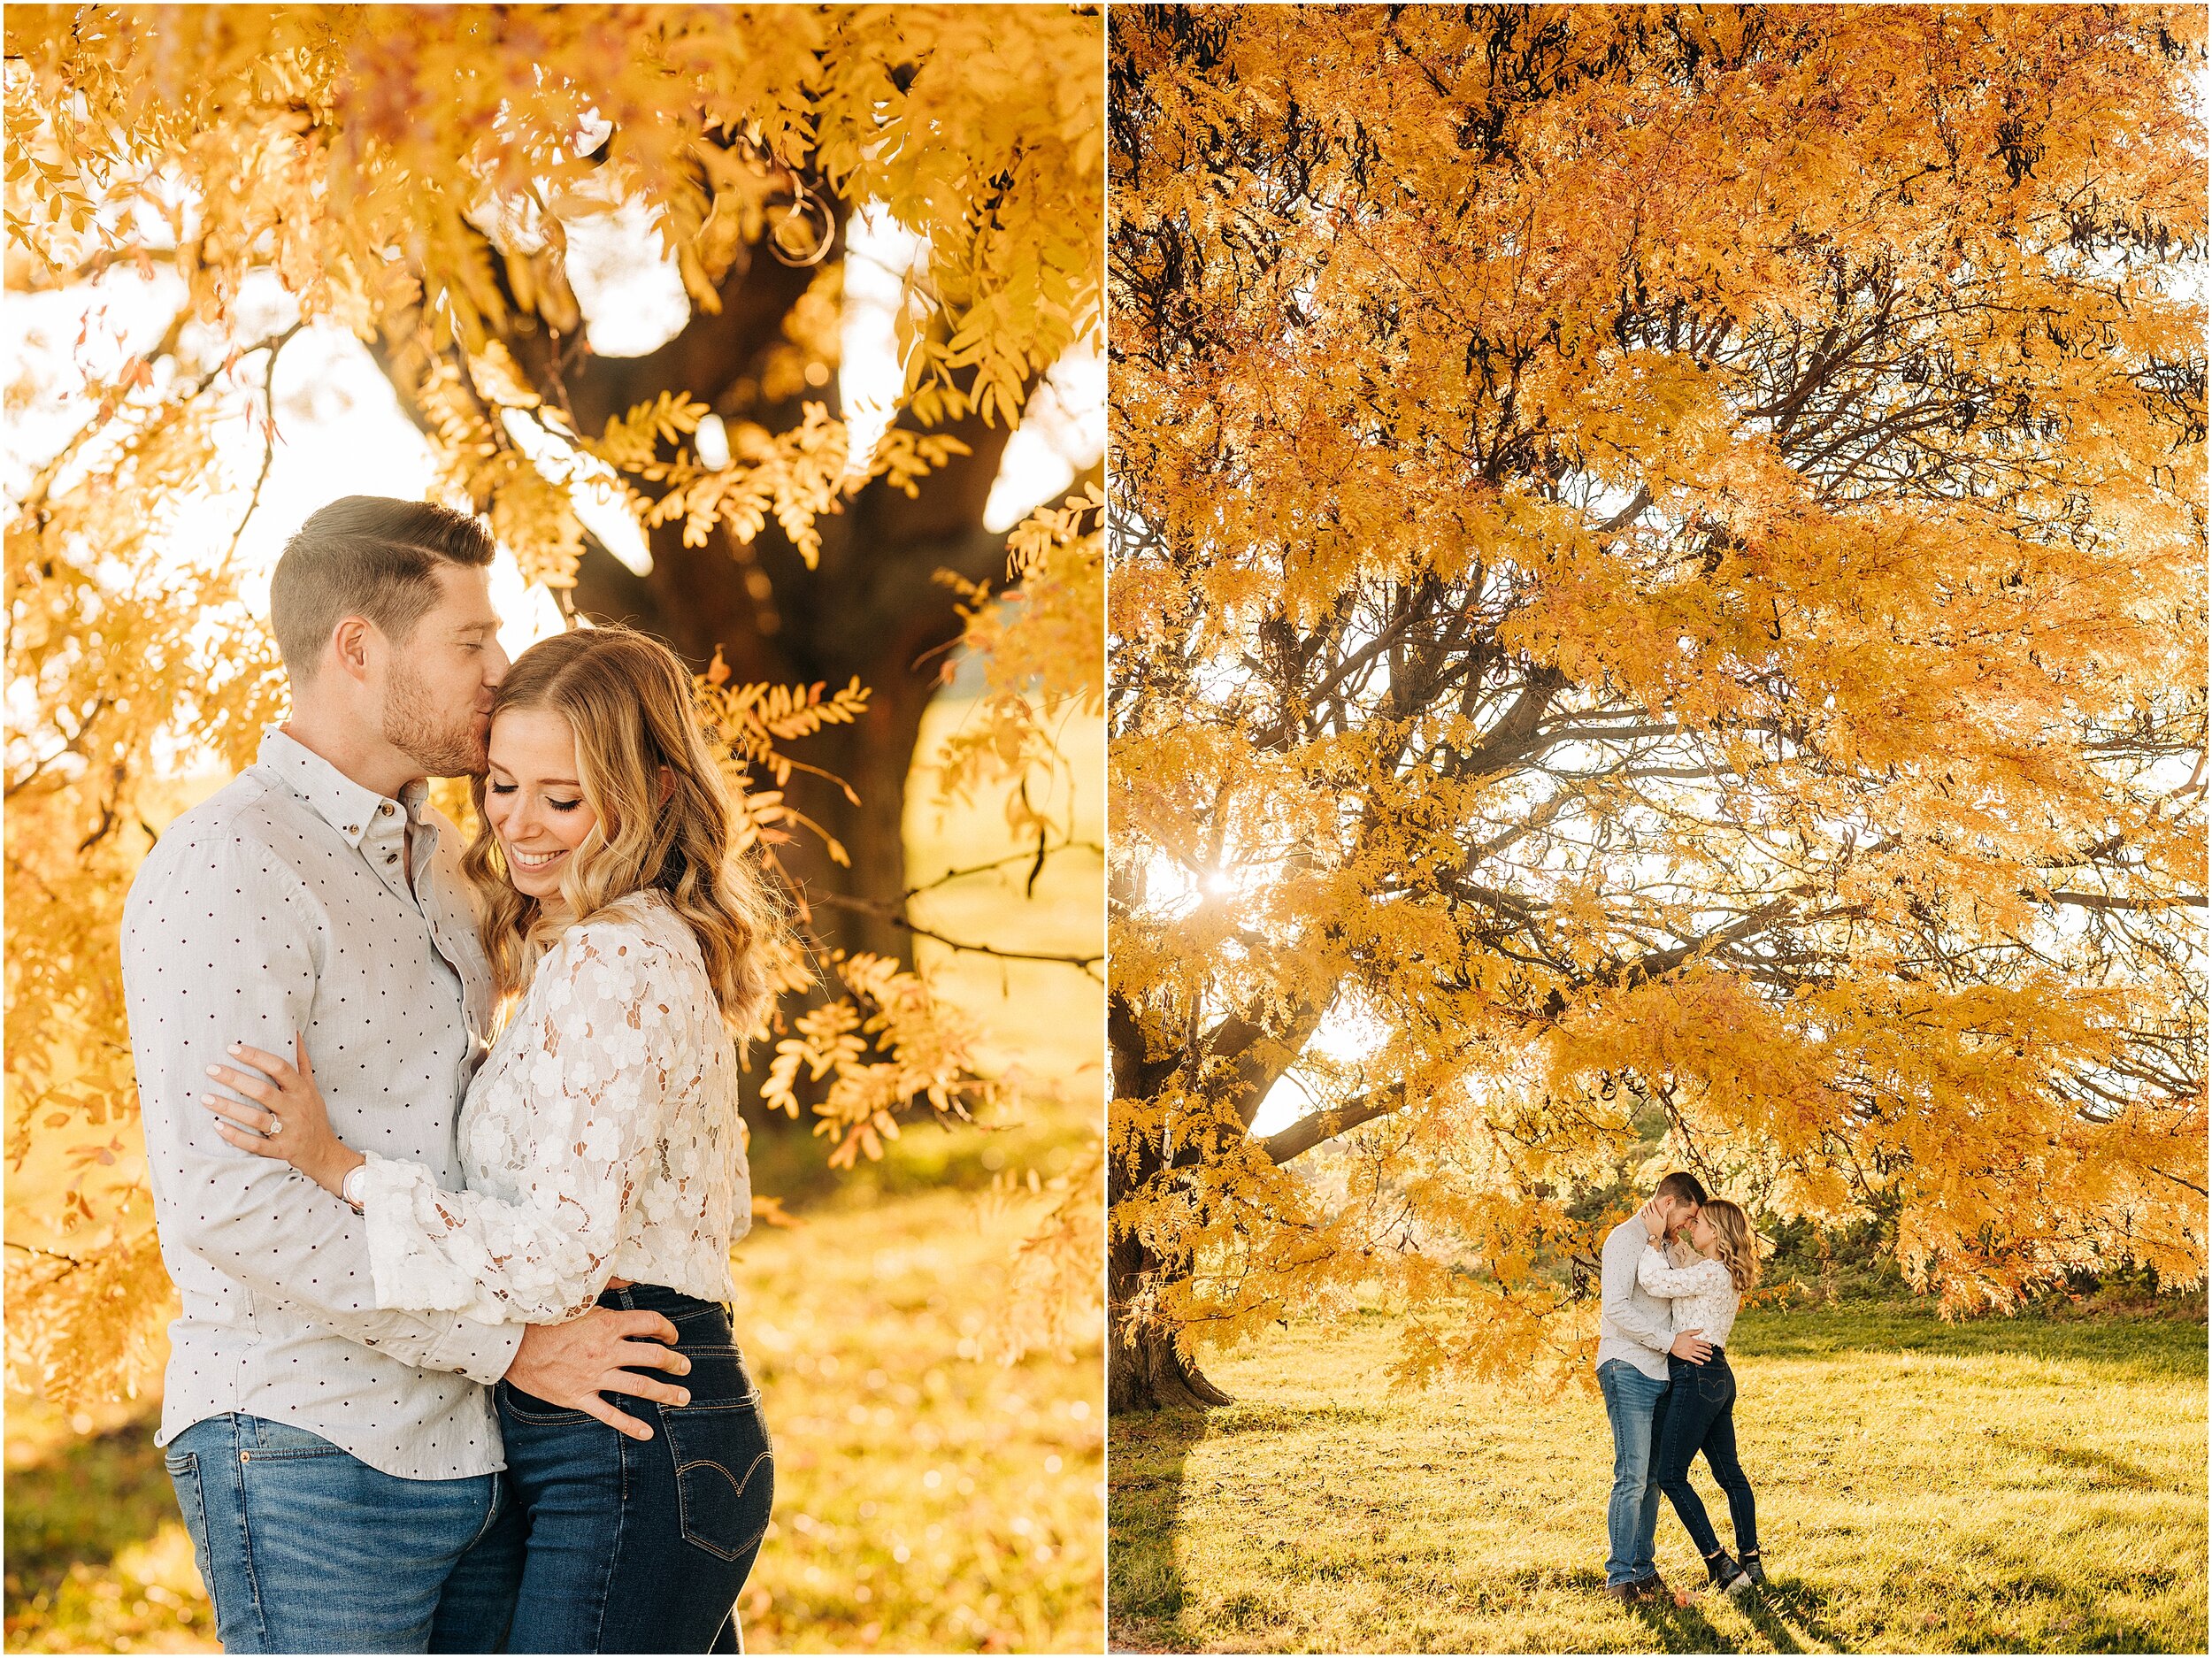 hannah leigh photography Baltimore City Maryland October Engagement Session_7052.jpg